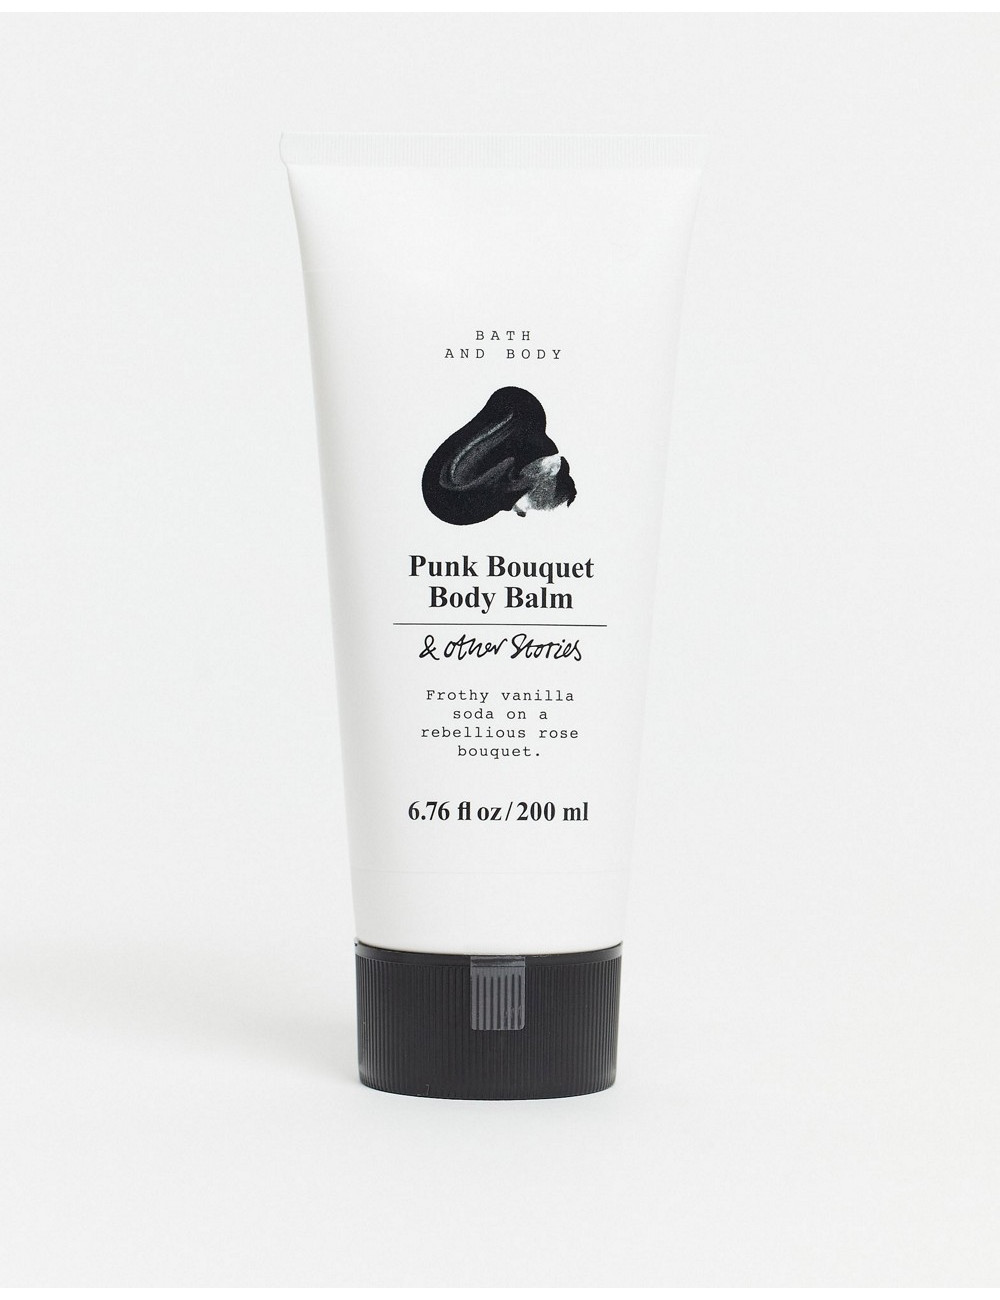 & Other Stories body balm...